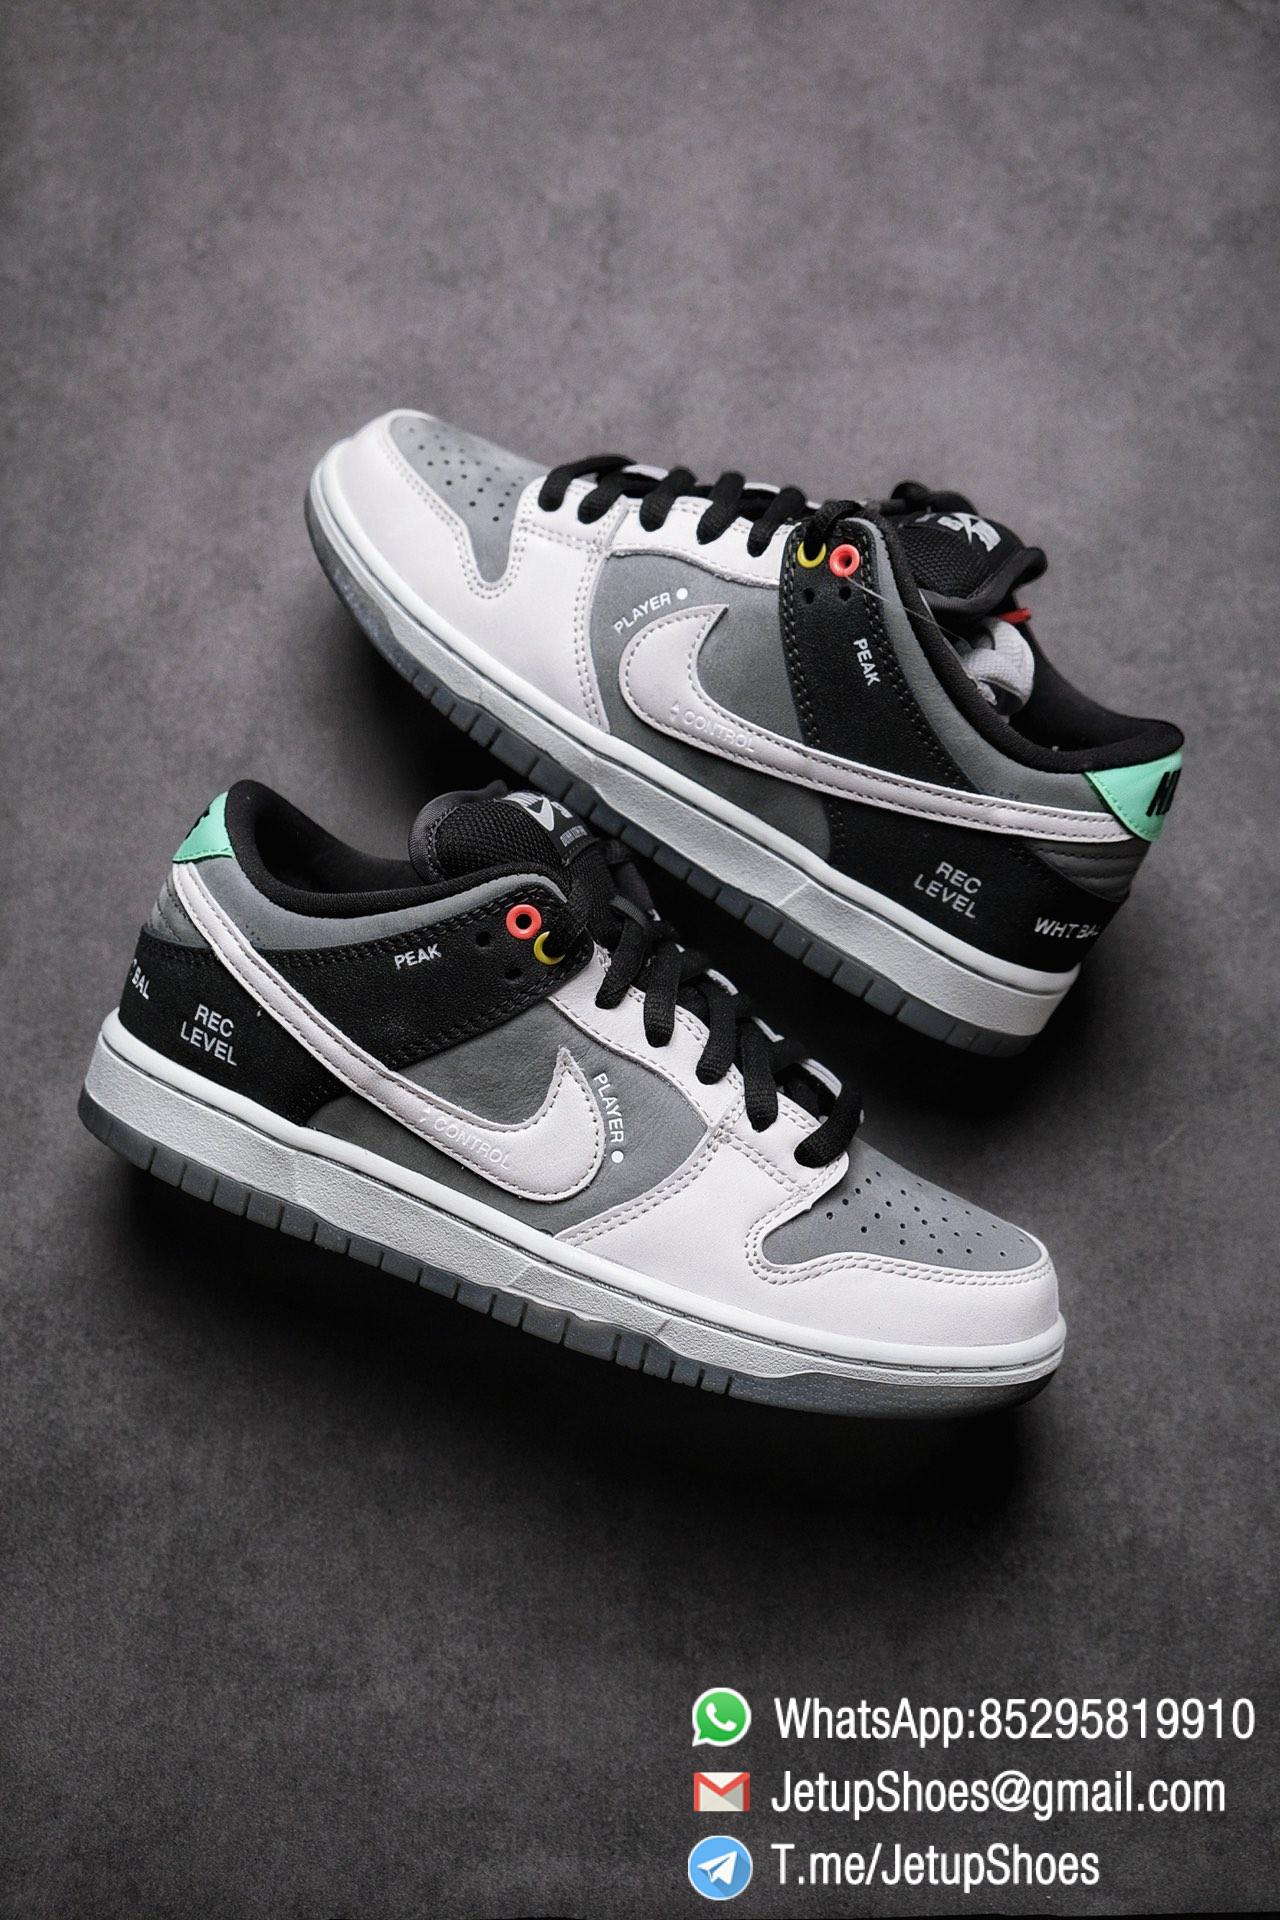 Best Replica Nike Dunk Low SB Camcorder VX1000 Camcorder Skateboarding Top Quality Sneakers 01